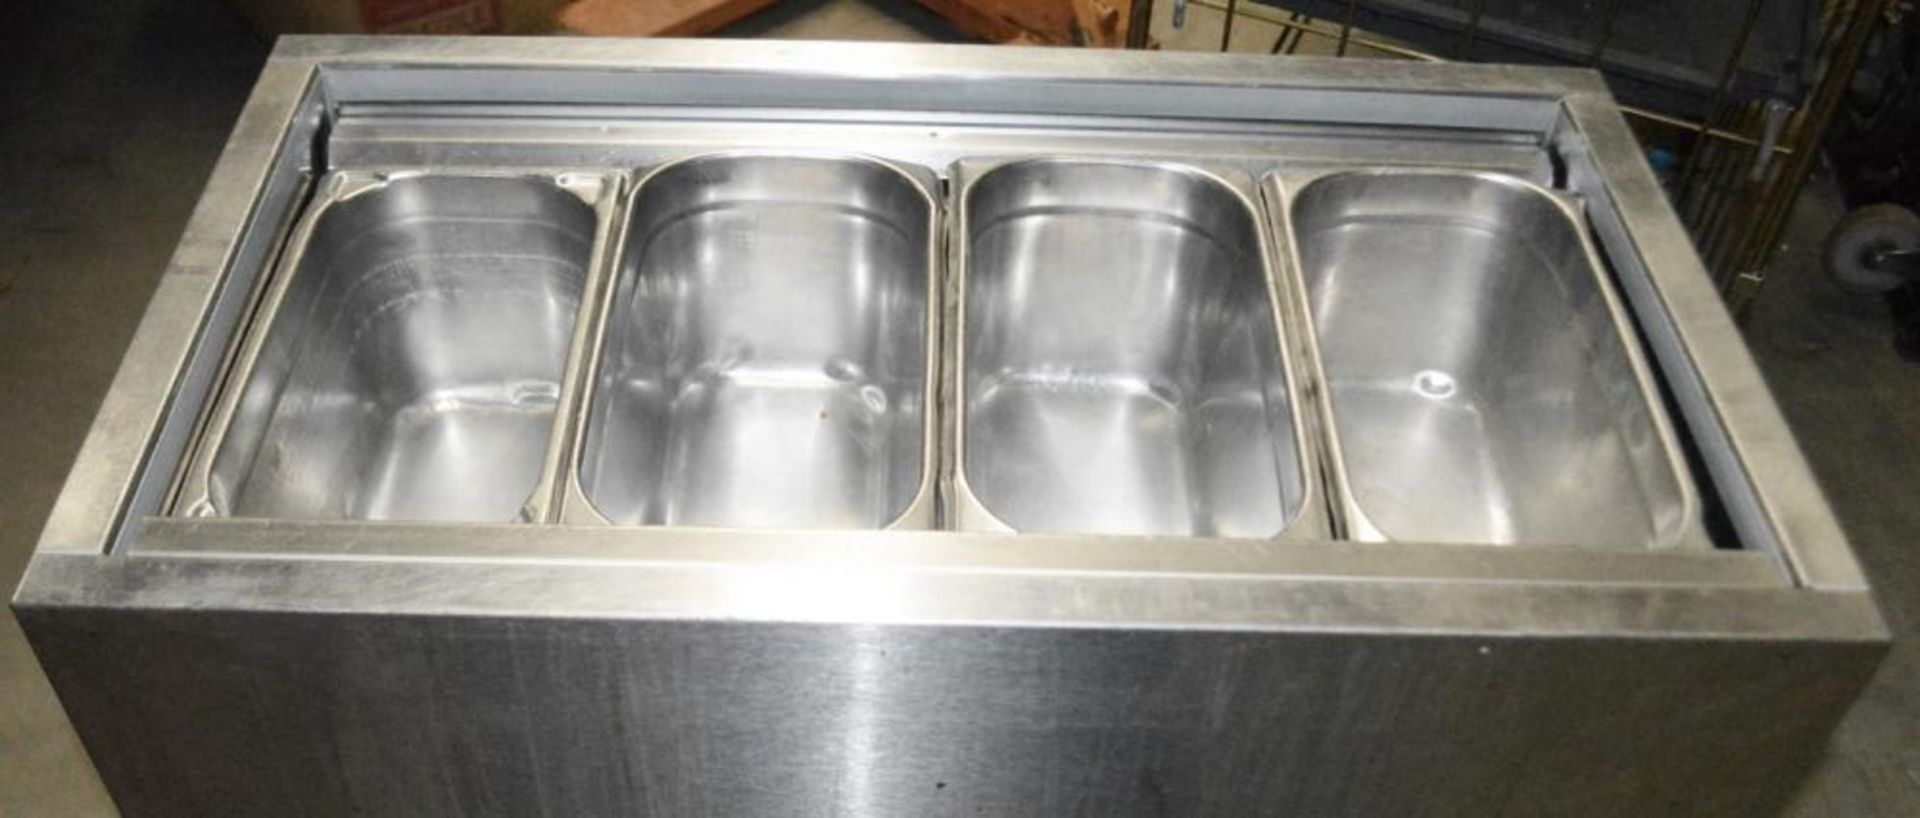 1 x Williams PW4/R290 Refrigerated Prep Well With 4 x Gastro Pans - Dimensions: H88 x W77 x D45cm - - Image 6 of 8